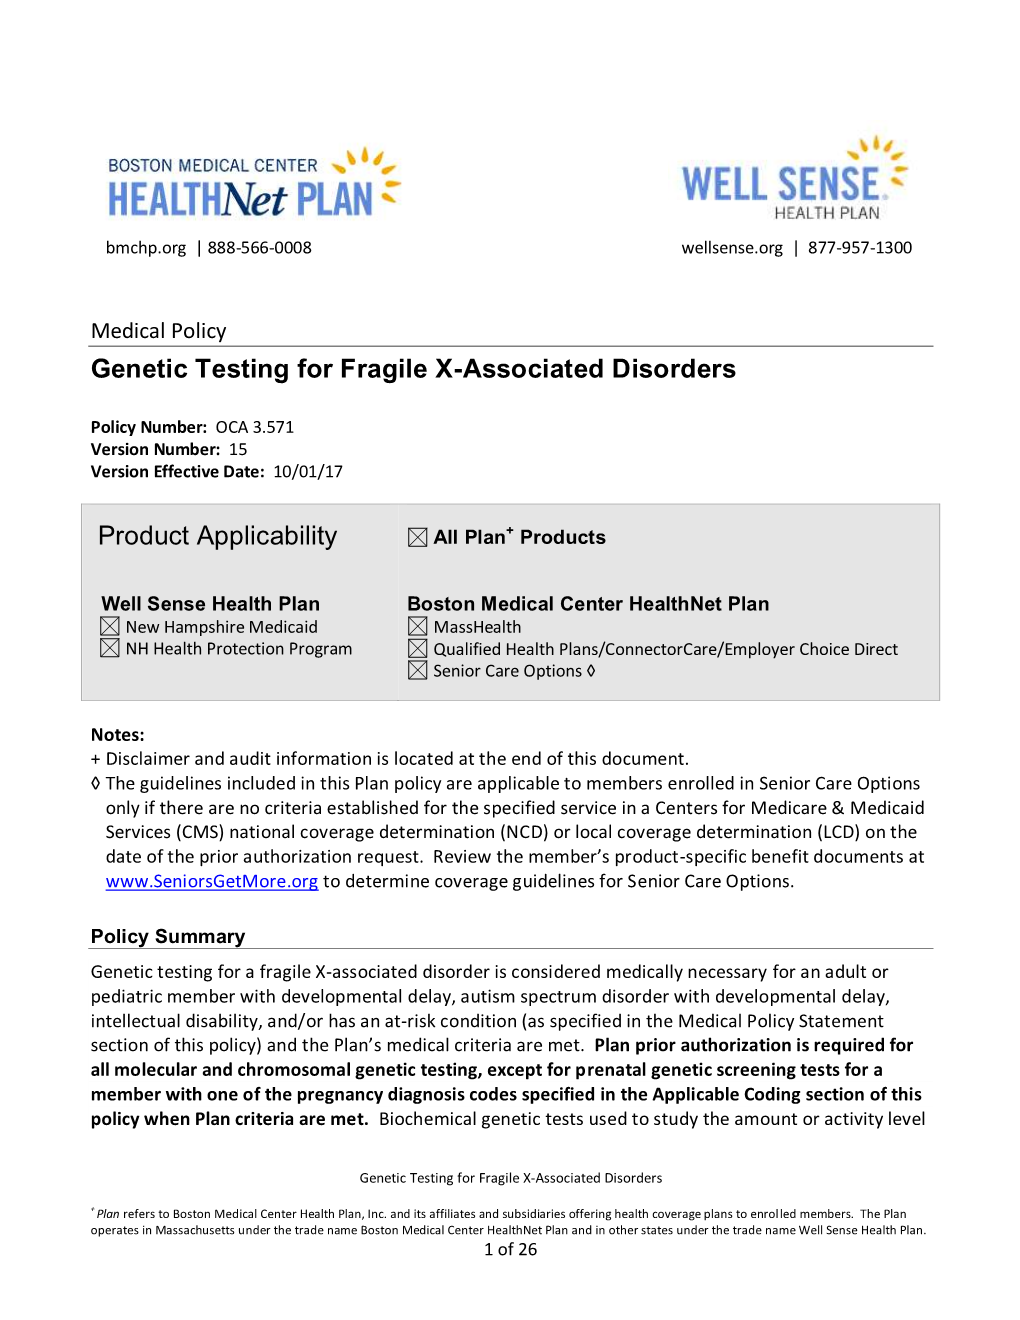 Genetic Testing for Fragile X-Associated Disorders Product